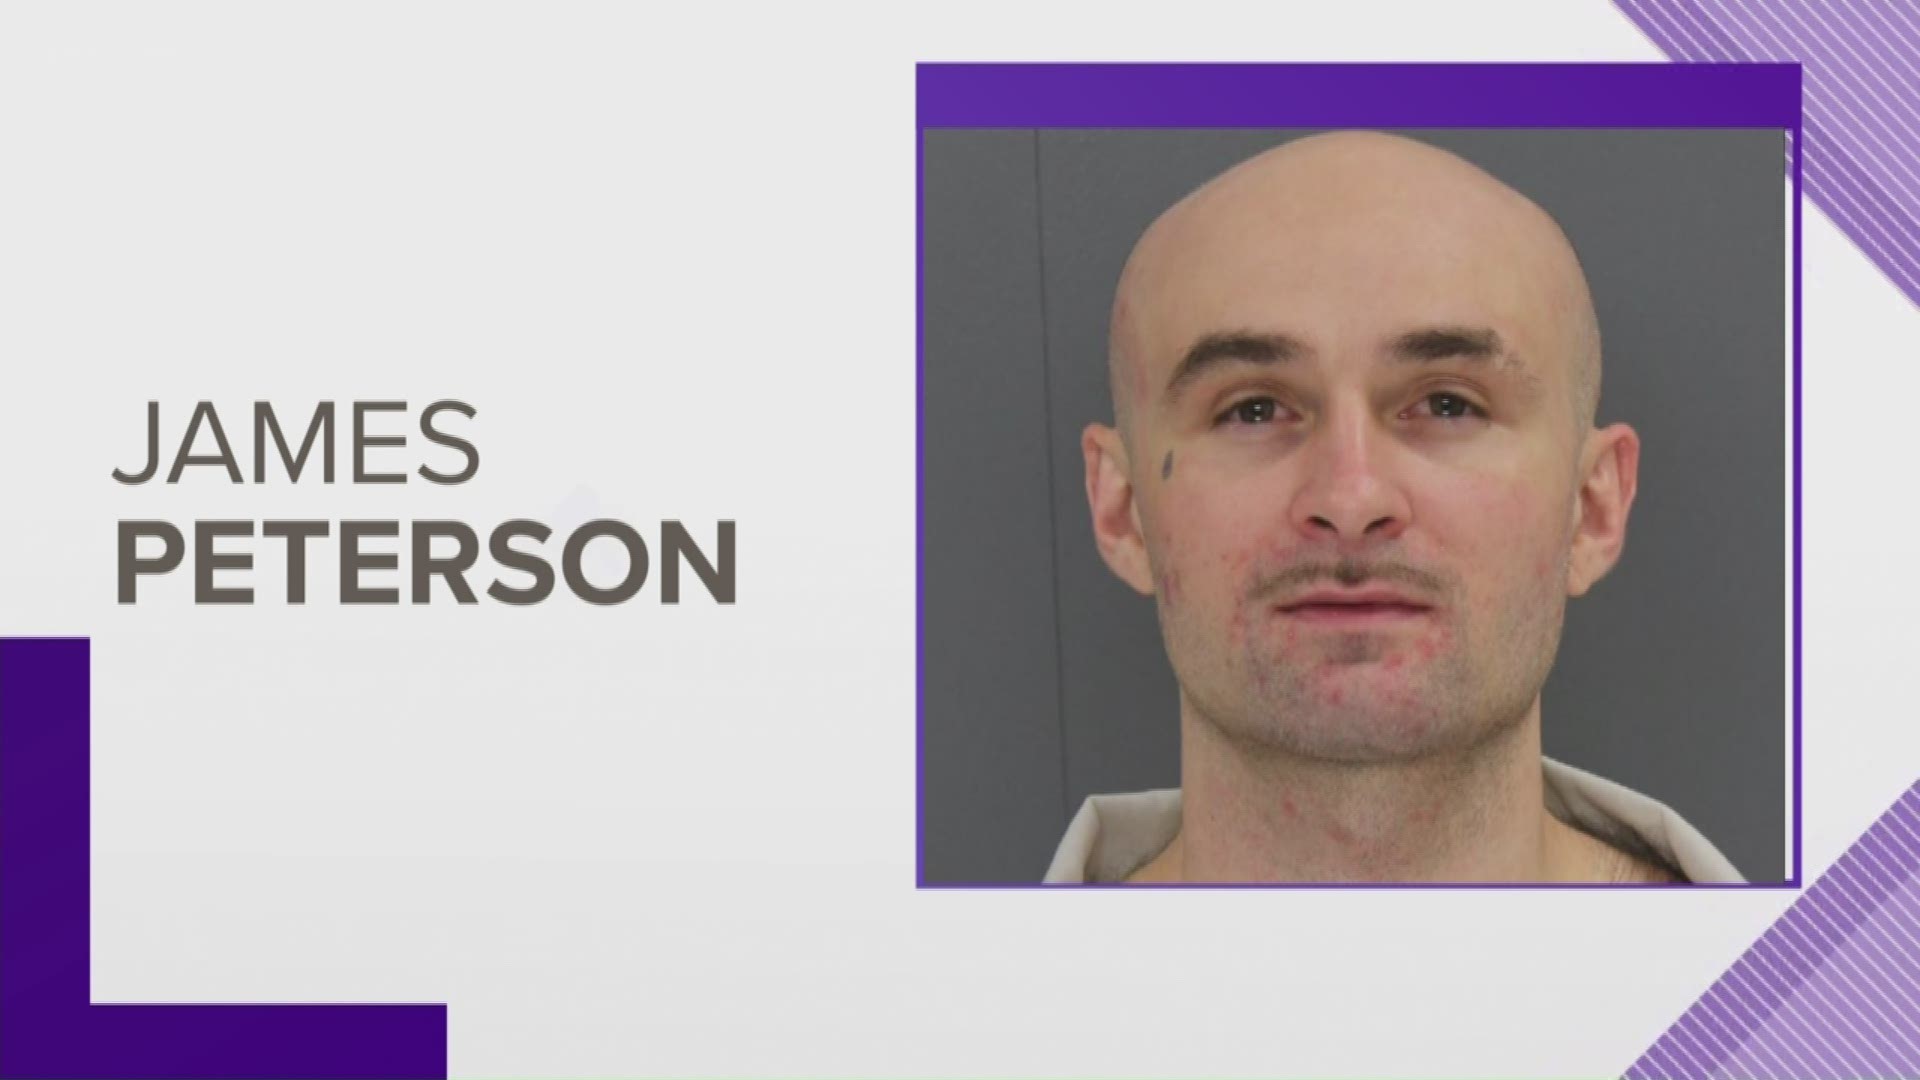 A woman was found murdered and deputies are saying it was arranged by James Peterson, 31 who is currently serving a 30 year sentence for a 2005 murder